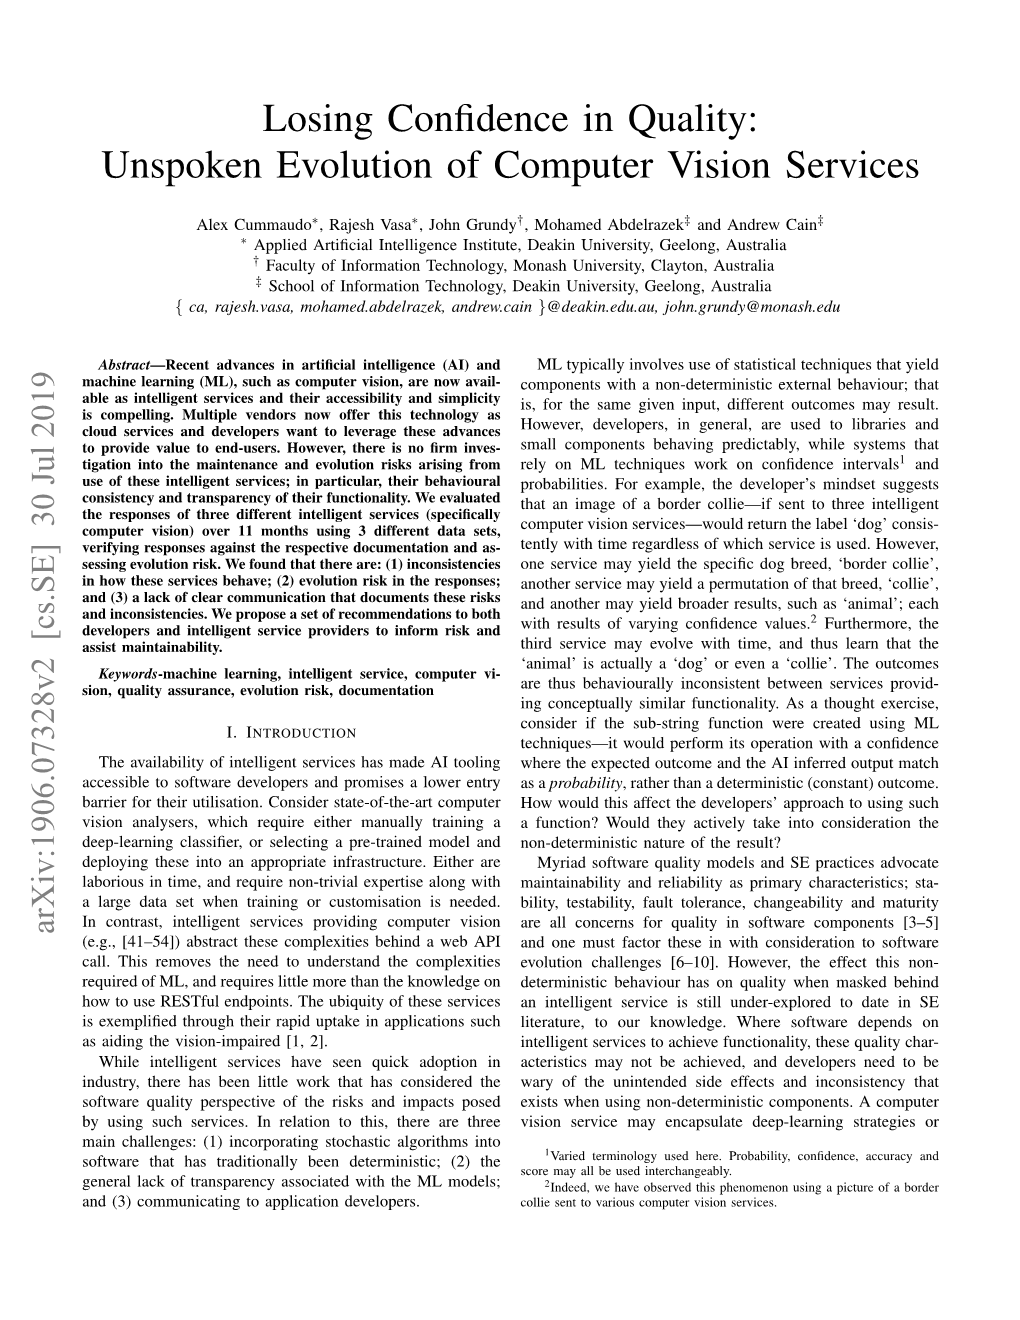 Losing Confidence in Quality: Unspoken Evolution of Computer Vision Services